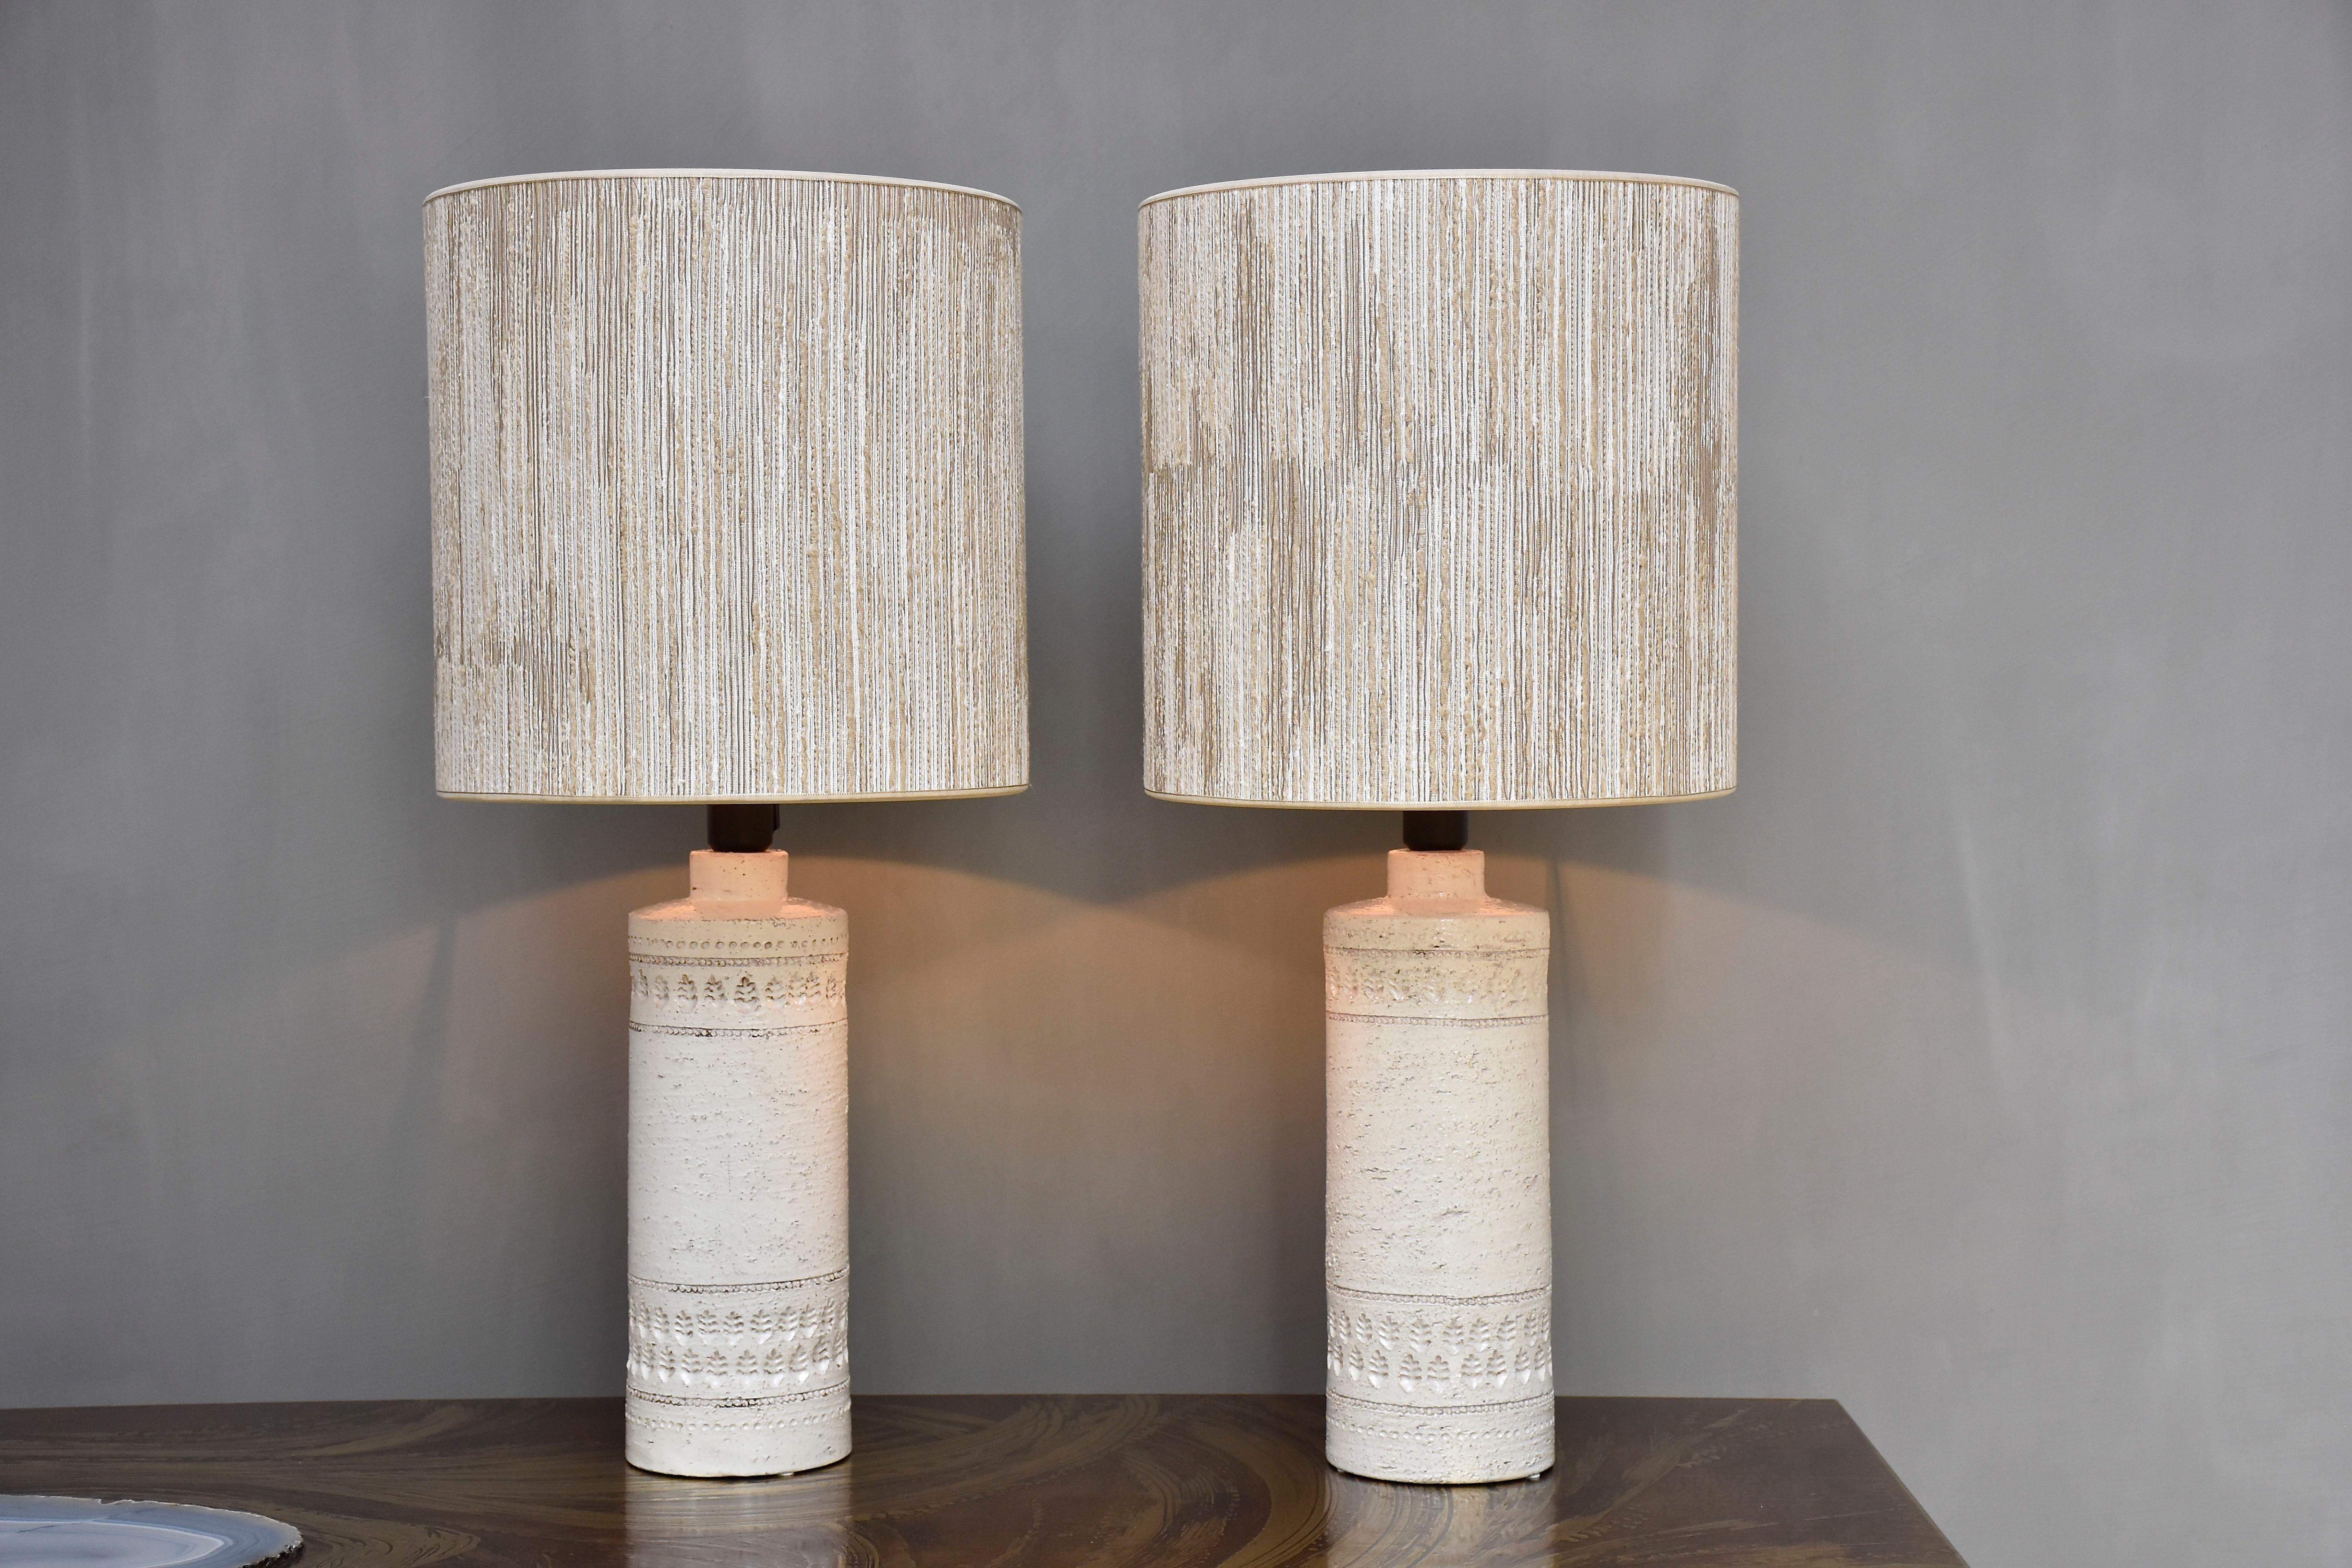 Beautiful pair ceramic table lamps designed by Bitossi for Bergboms- Sweden.
These pretty lamps have white glazed base with  texture and paterns.
Period- ca. 1960
Place of origin- Italy/ Sweden

Including new luxurious high quality hand made